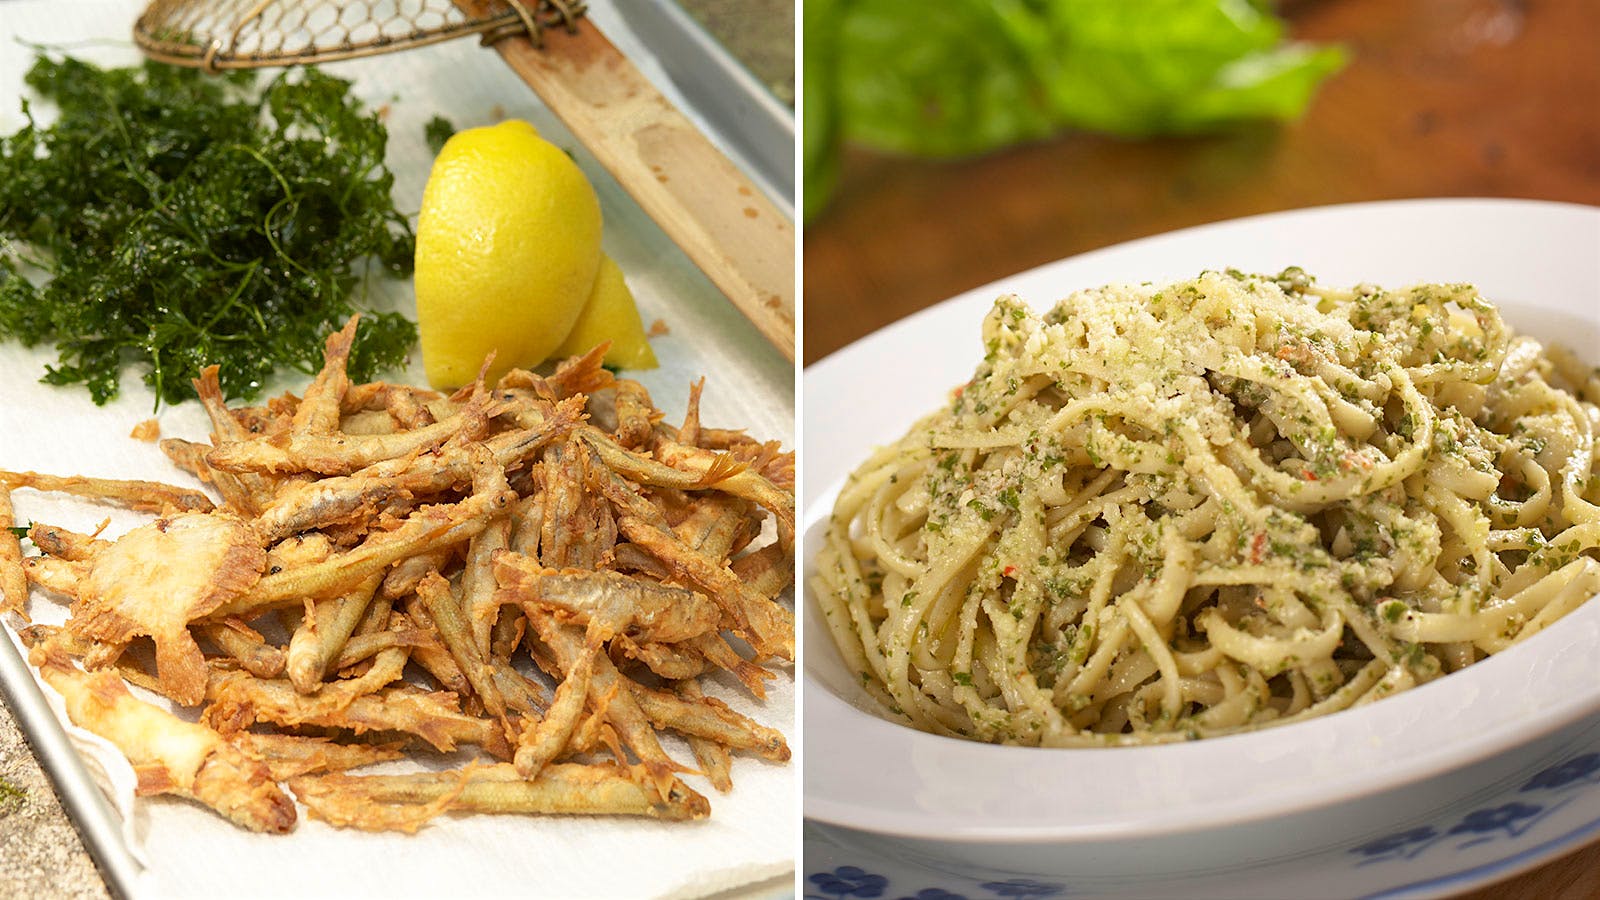 Jacques Pépin’s Summery Fish-and-Pasta Feast for Father’s Day